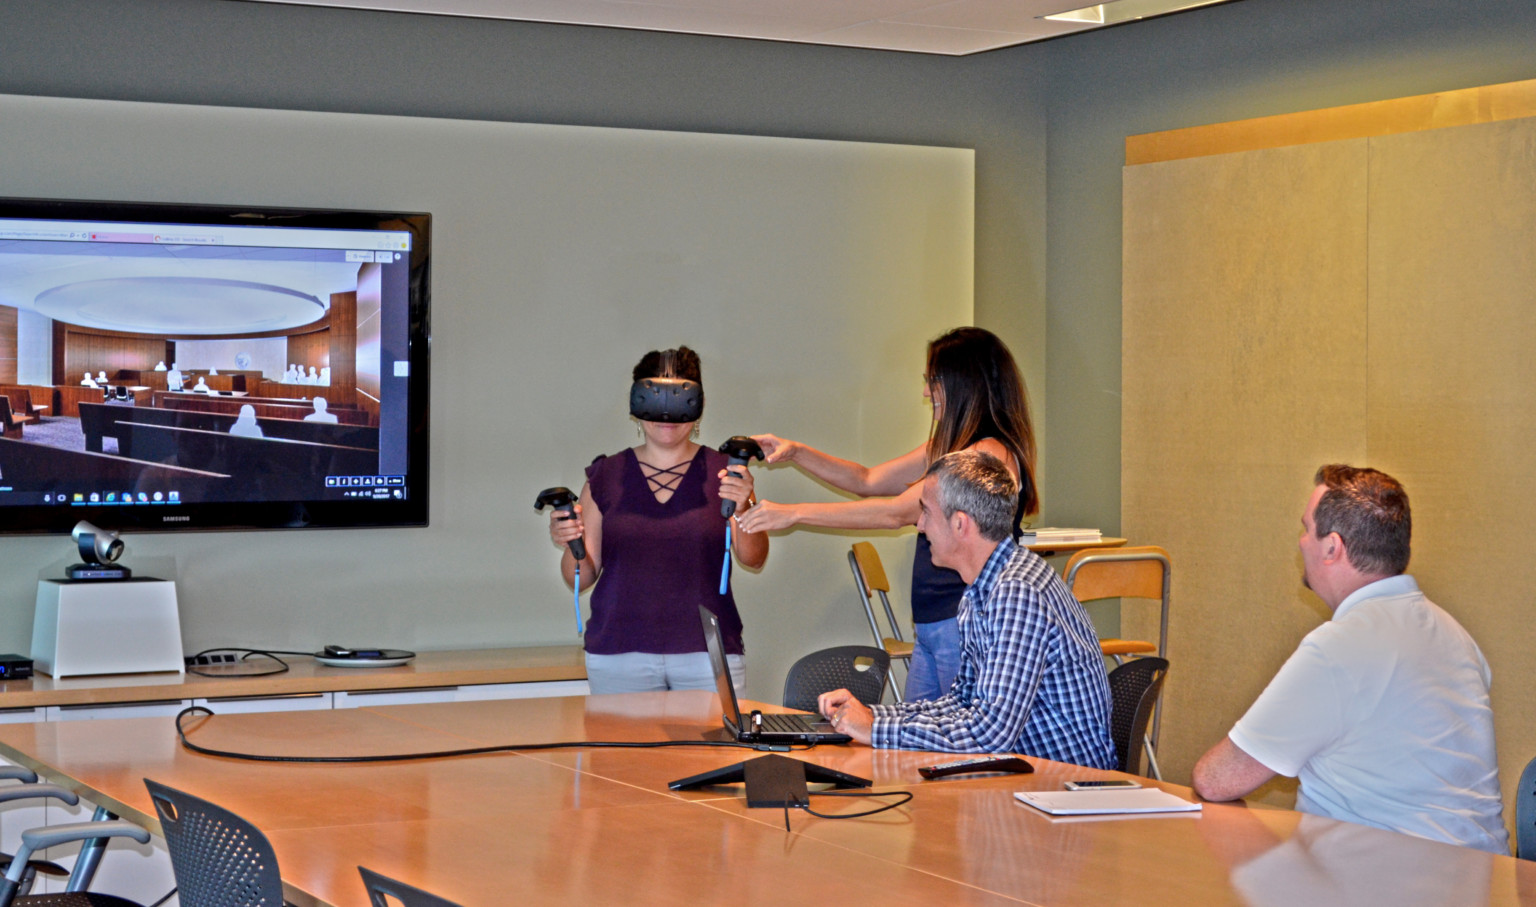 people around a table where woman is using virtual reality system to experience mock-up of courtroom design